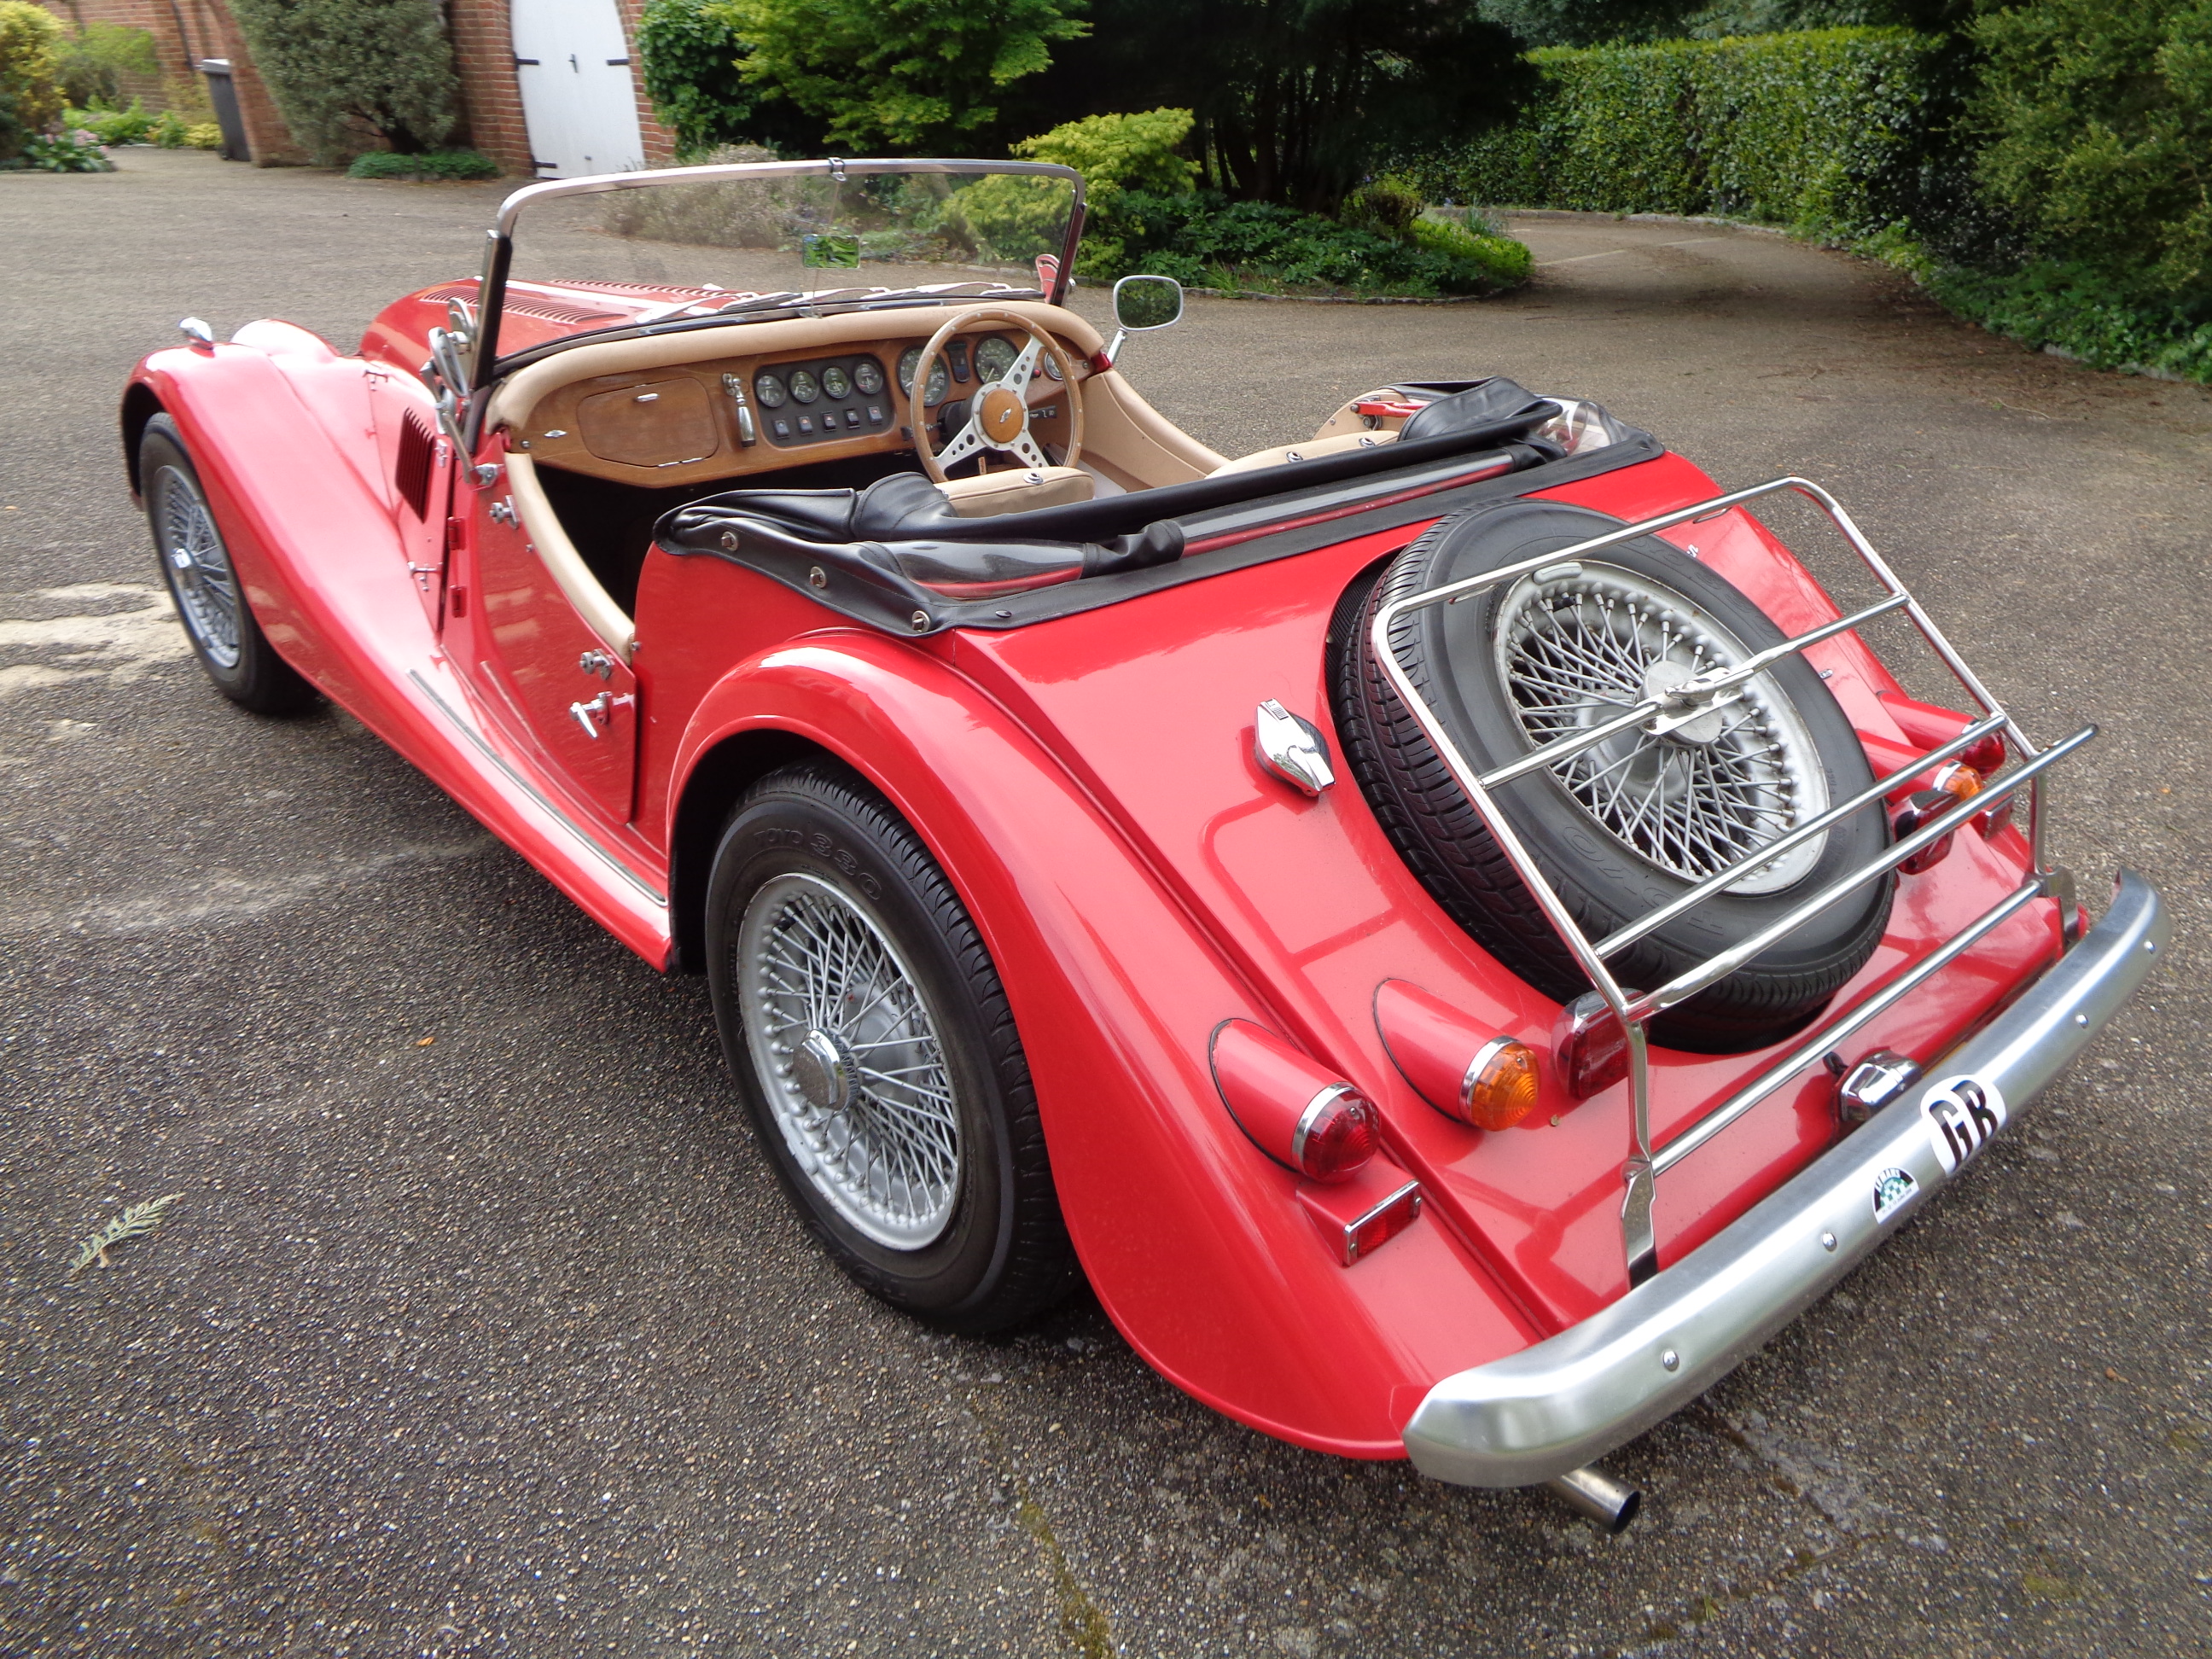 1983 Morgan 4/4 - Un-mistakable style for the British car enthusiast - A true gentleman’s car! - Image 4 of 19